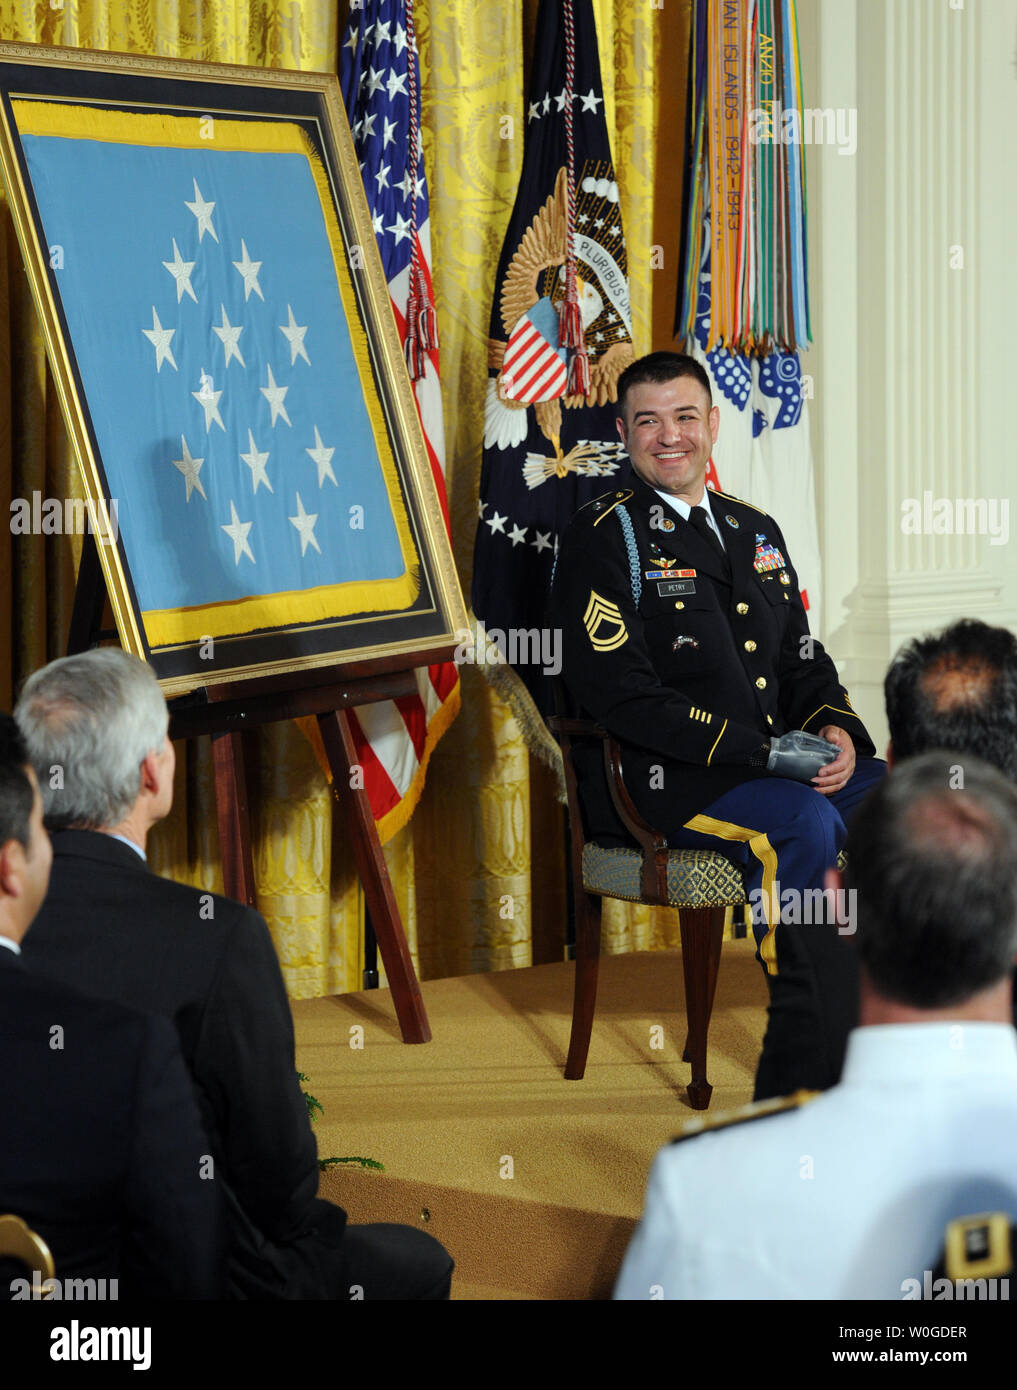 File:Medal of Honor for Sergeant First Class Leroy Arthur Petry